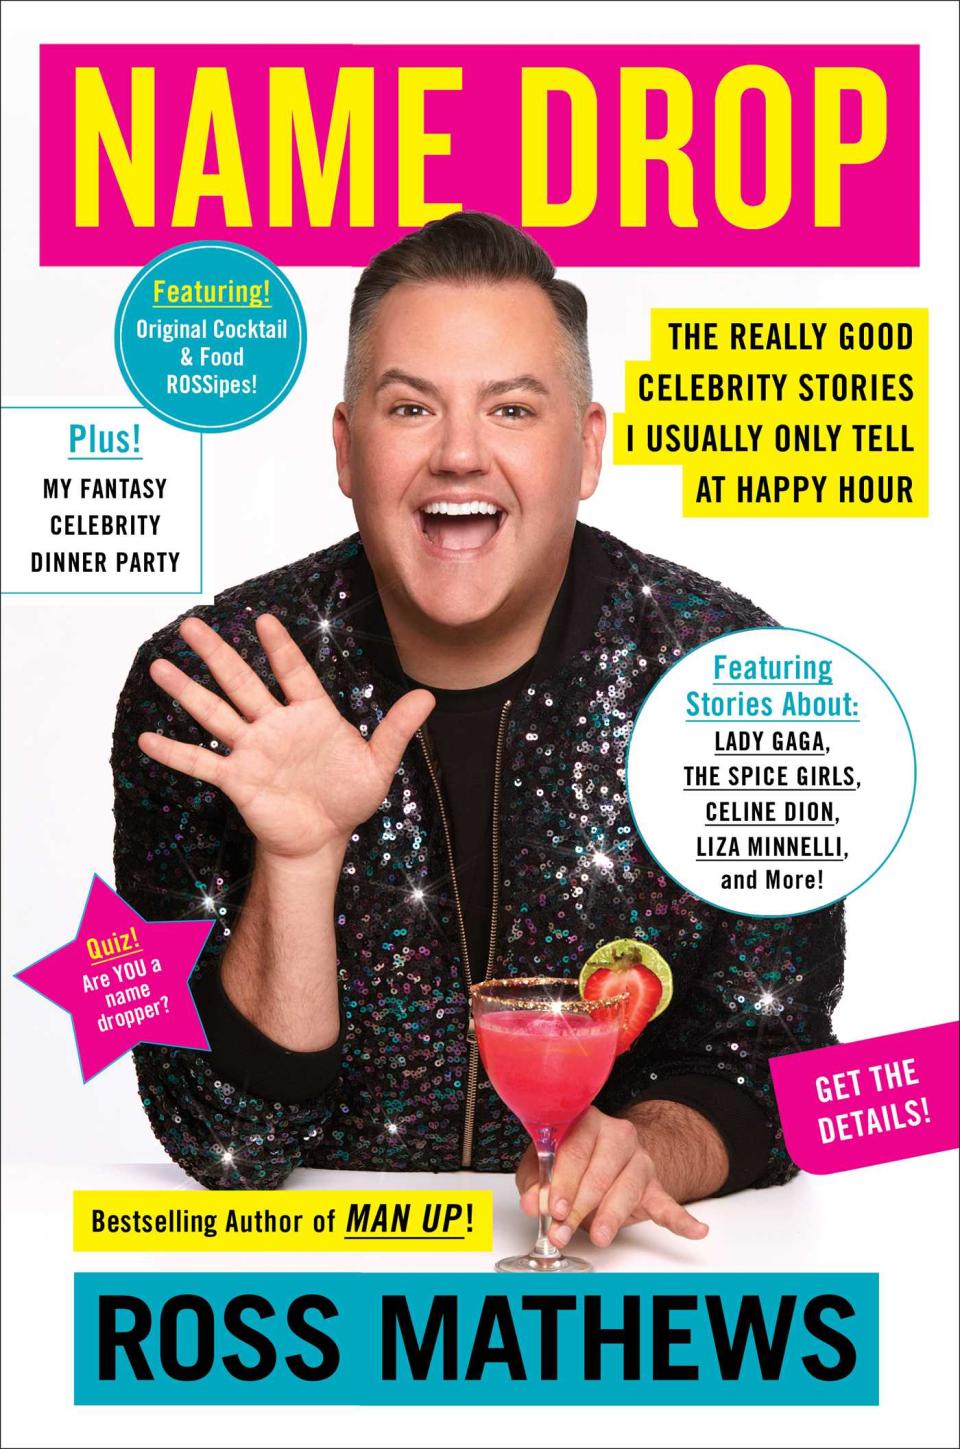 “Name Drop: The Really Good Celebrity Stories I Usually Only Tell at Happy Hour,” by Ross Mathews, is out Feb. 4.